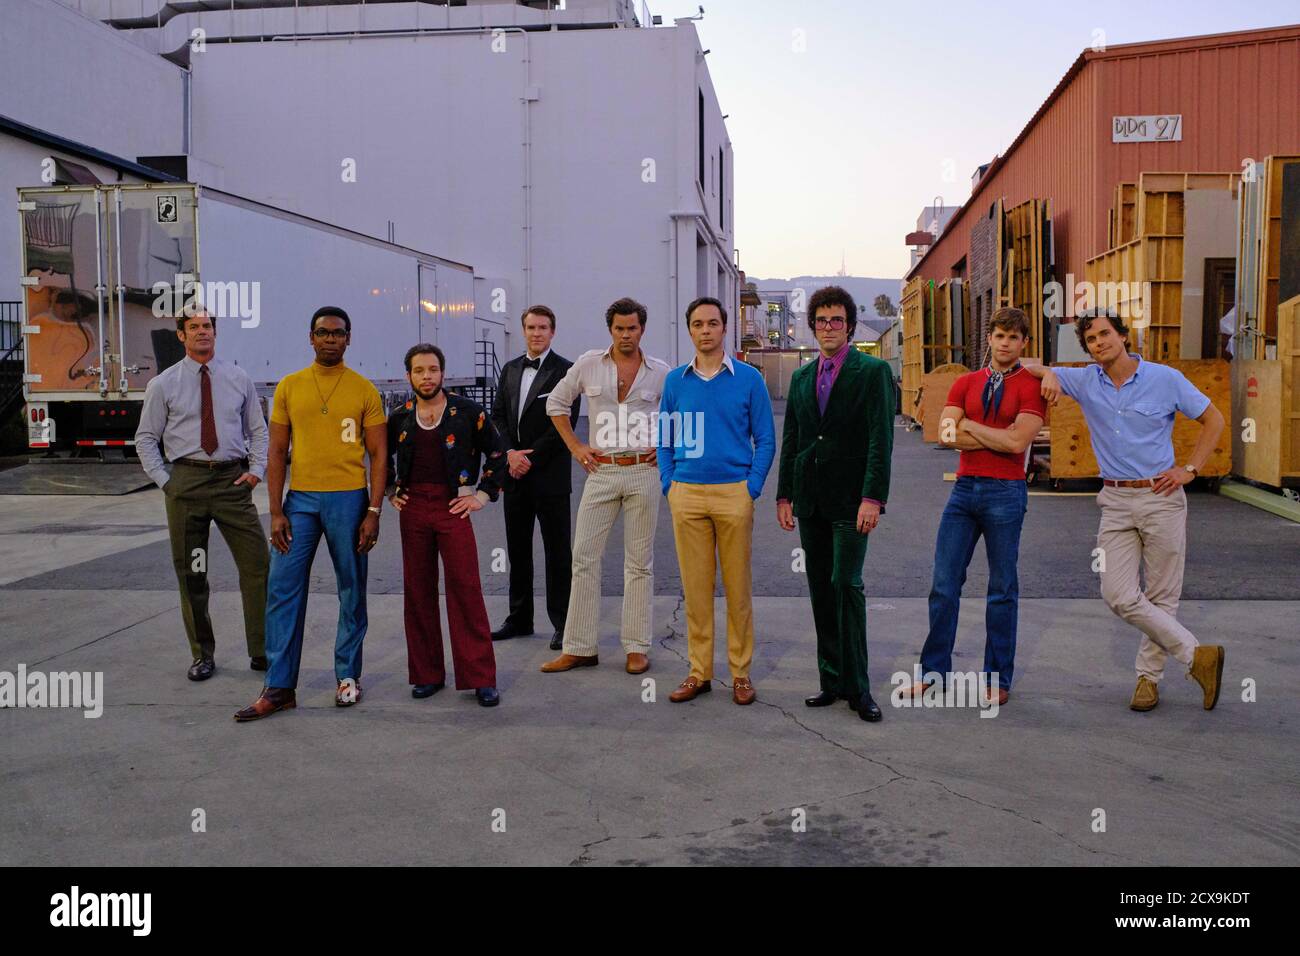 RELEASE DATE: September 30, 2020 TITLE: The Boys in The Band STUDIO: Netflix DIRECTOR: Joe Mantello PLOT: At a birthday party in 1968 New York, a surprise guest and a drunken game leave seven gay friends reckoning with unspoken feelings and buried truths. STARRING: Tuc Watkins, Michael Benjamin Washington, Robin de Jesœs, Brian Hutchison, Andrew Rannells, Jim Parsons, Zachary Quinto, Charlie Carver and Matt Bomer. (Credit Image: © Netflix/Entertainment Pictures) Stock Photo